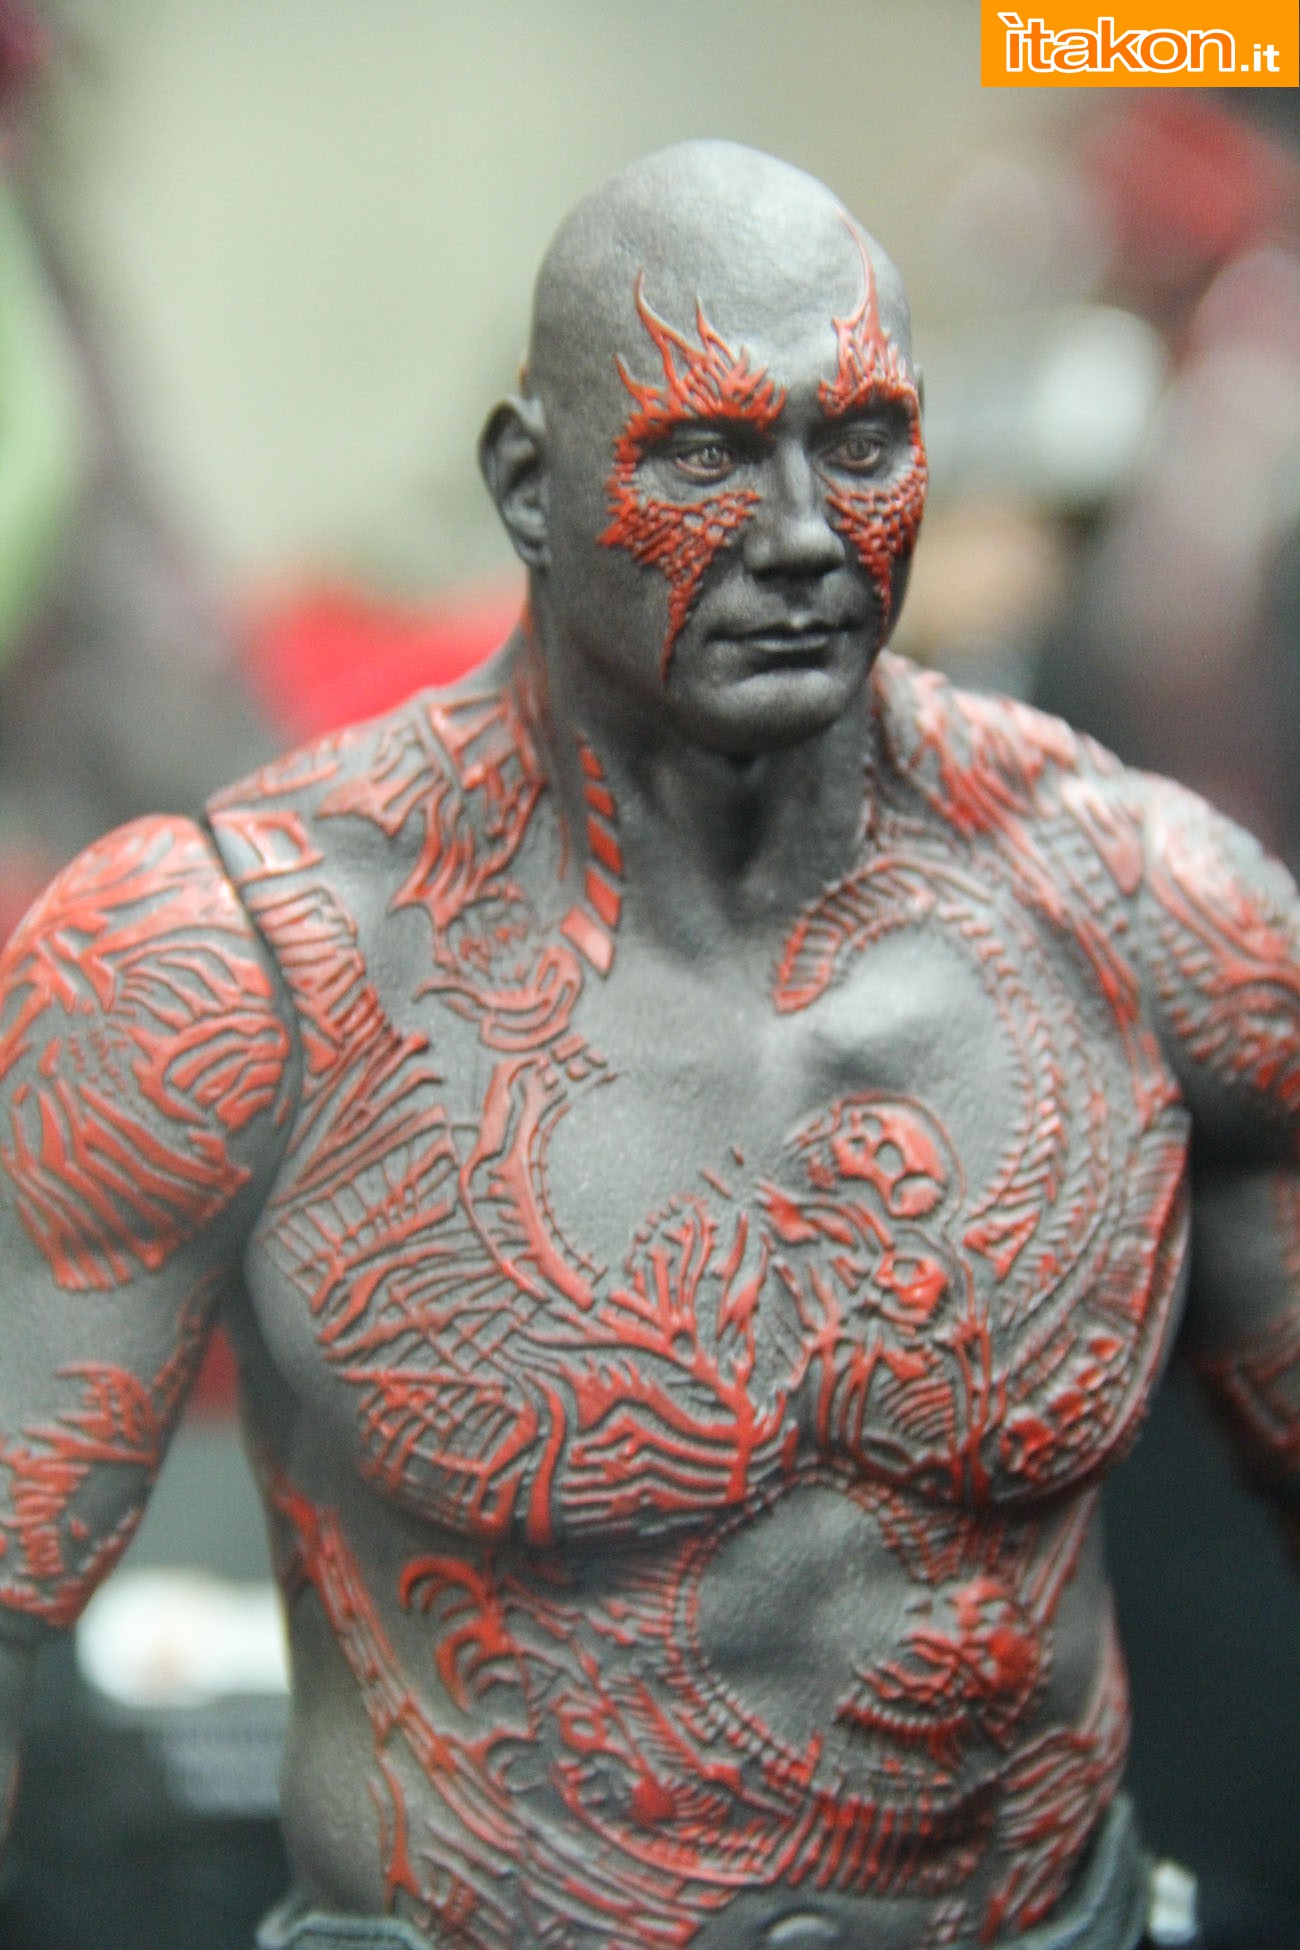 sdcc2014-hot-toys-booth-6.jpg